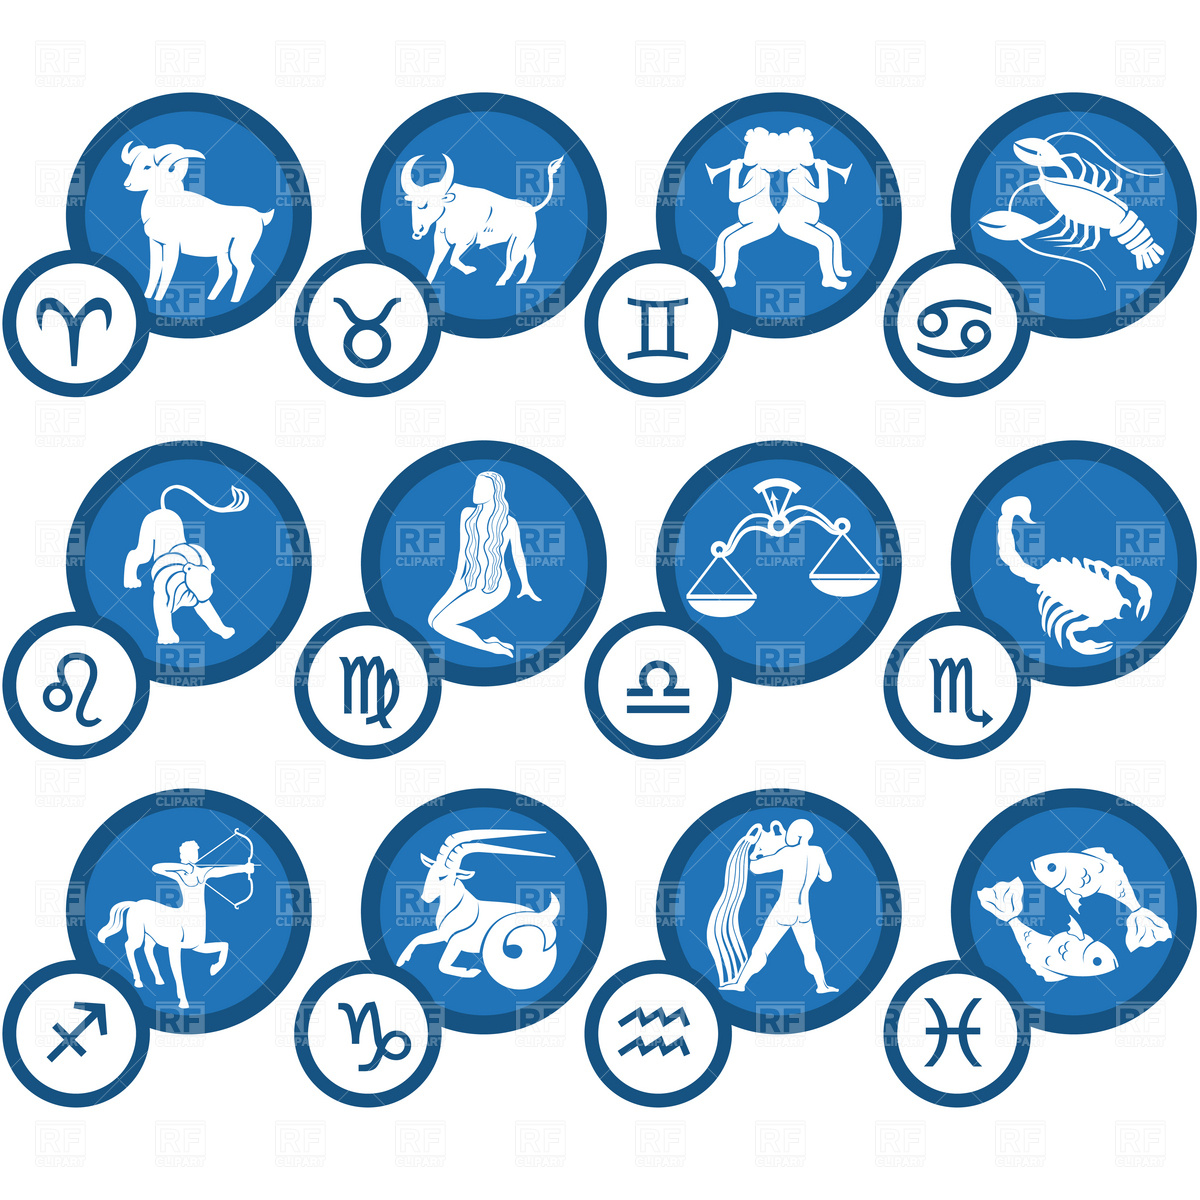 Horoscope clipart #2, Download drawings